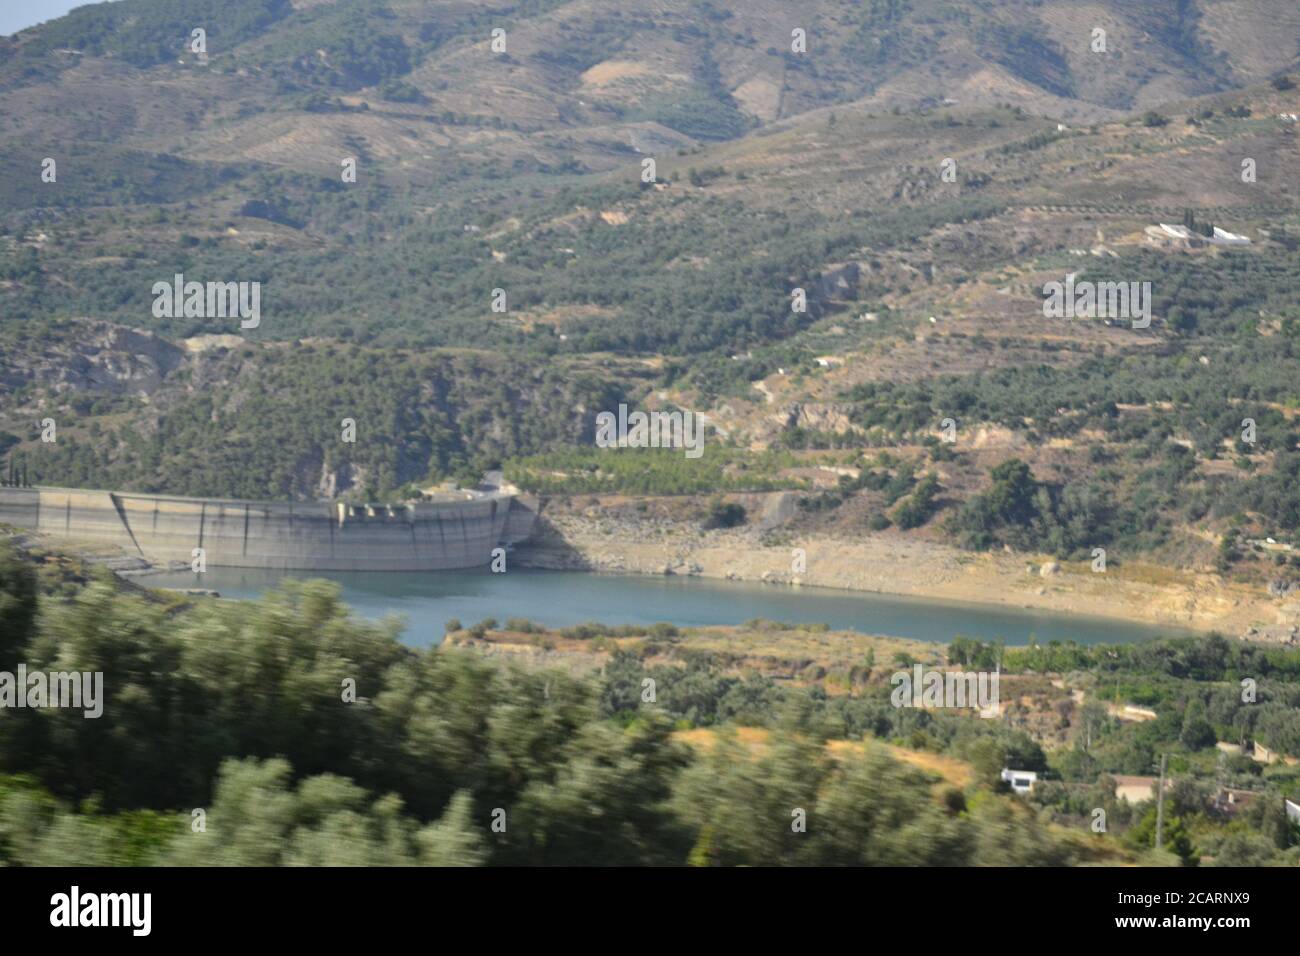 Trevlez is a village in the province of Granada. The river Trevlez flows through the village. They are located in the western part of the Alpujarras Stock Photo